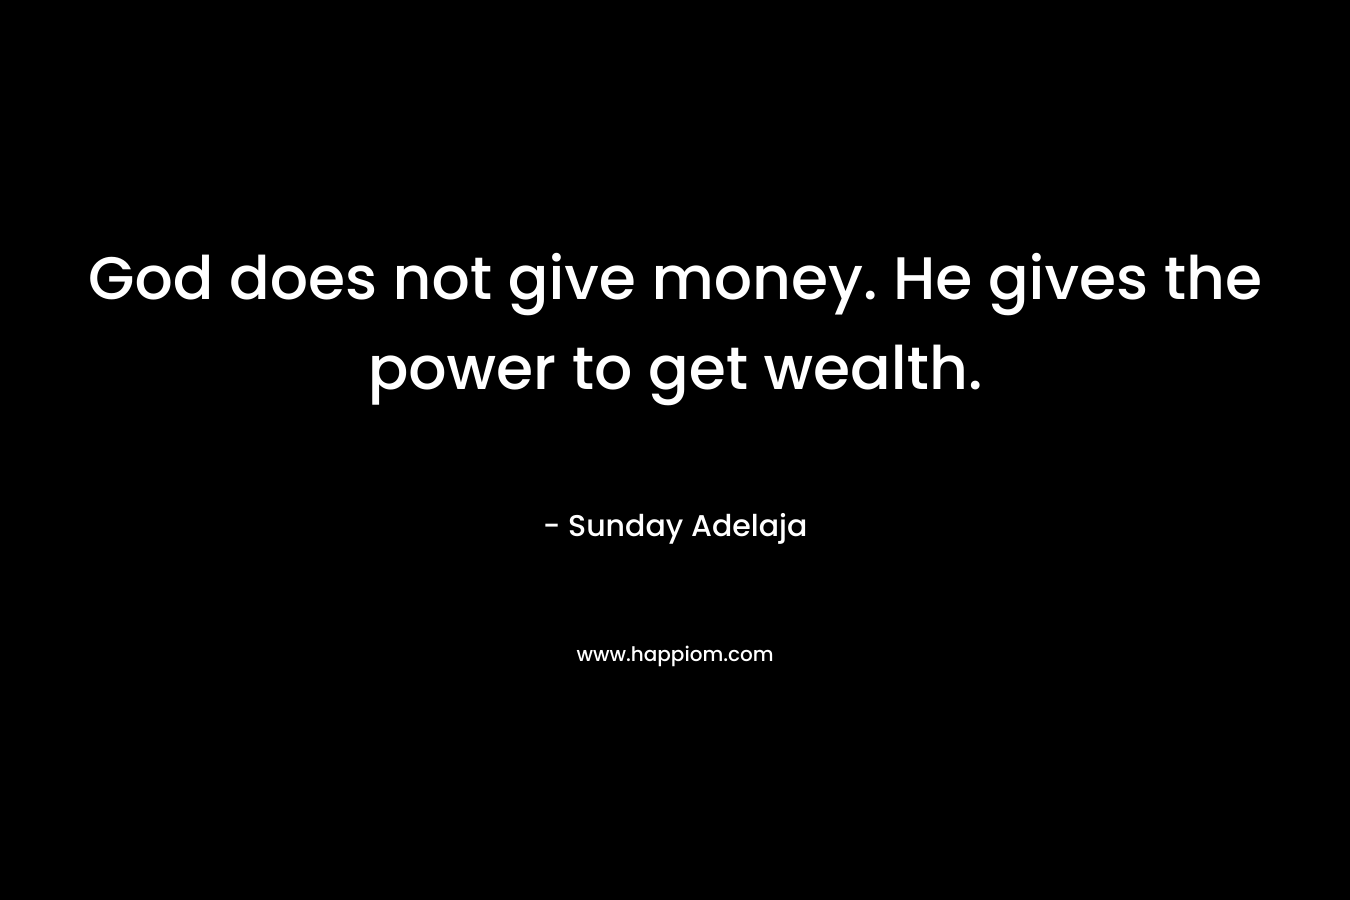 God does not give money. He gives the power to get wealth.